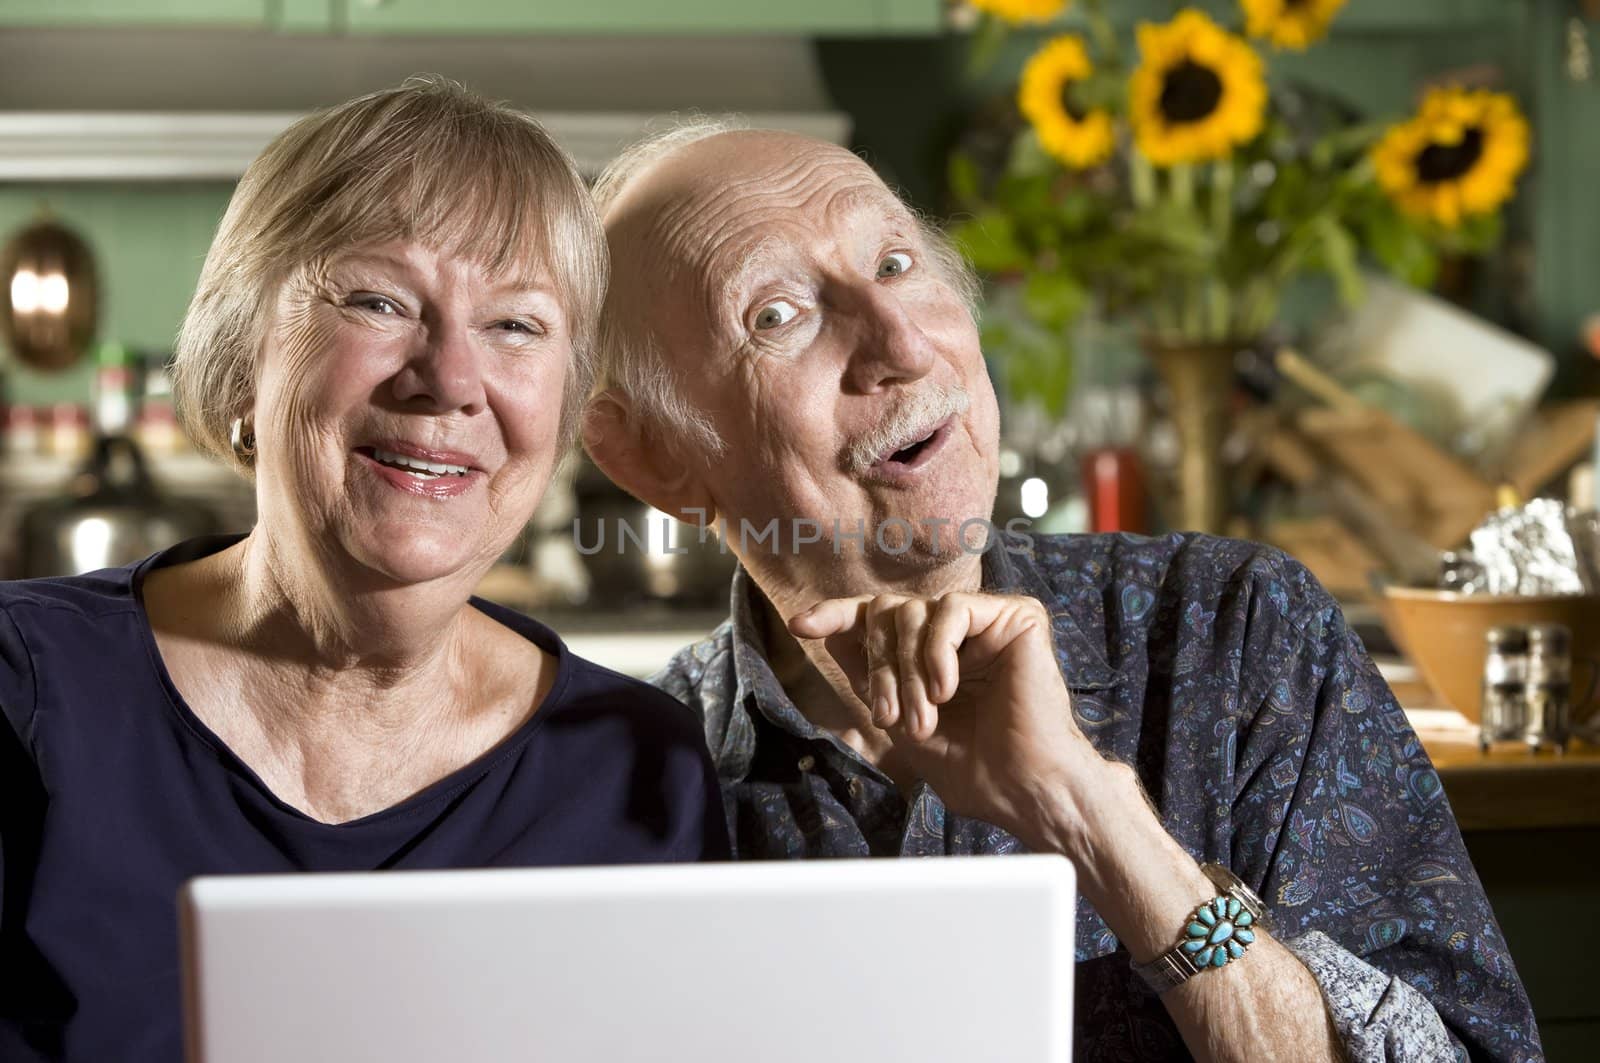 Smiling Senior Couple with a Laptop Computer by Creatista